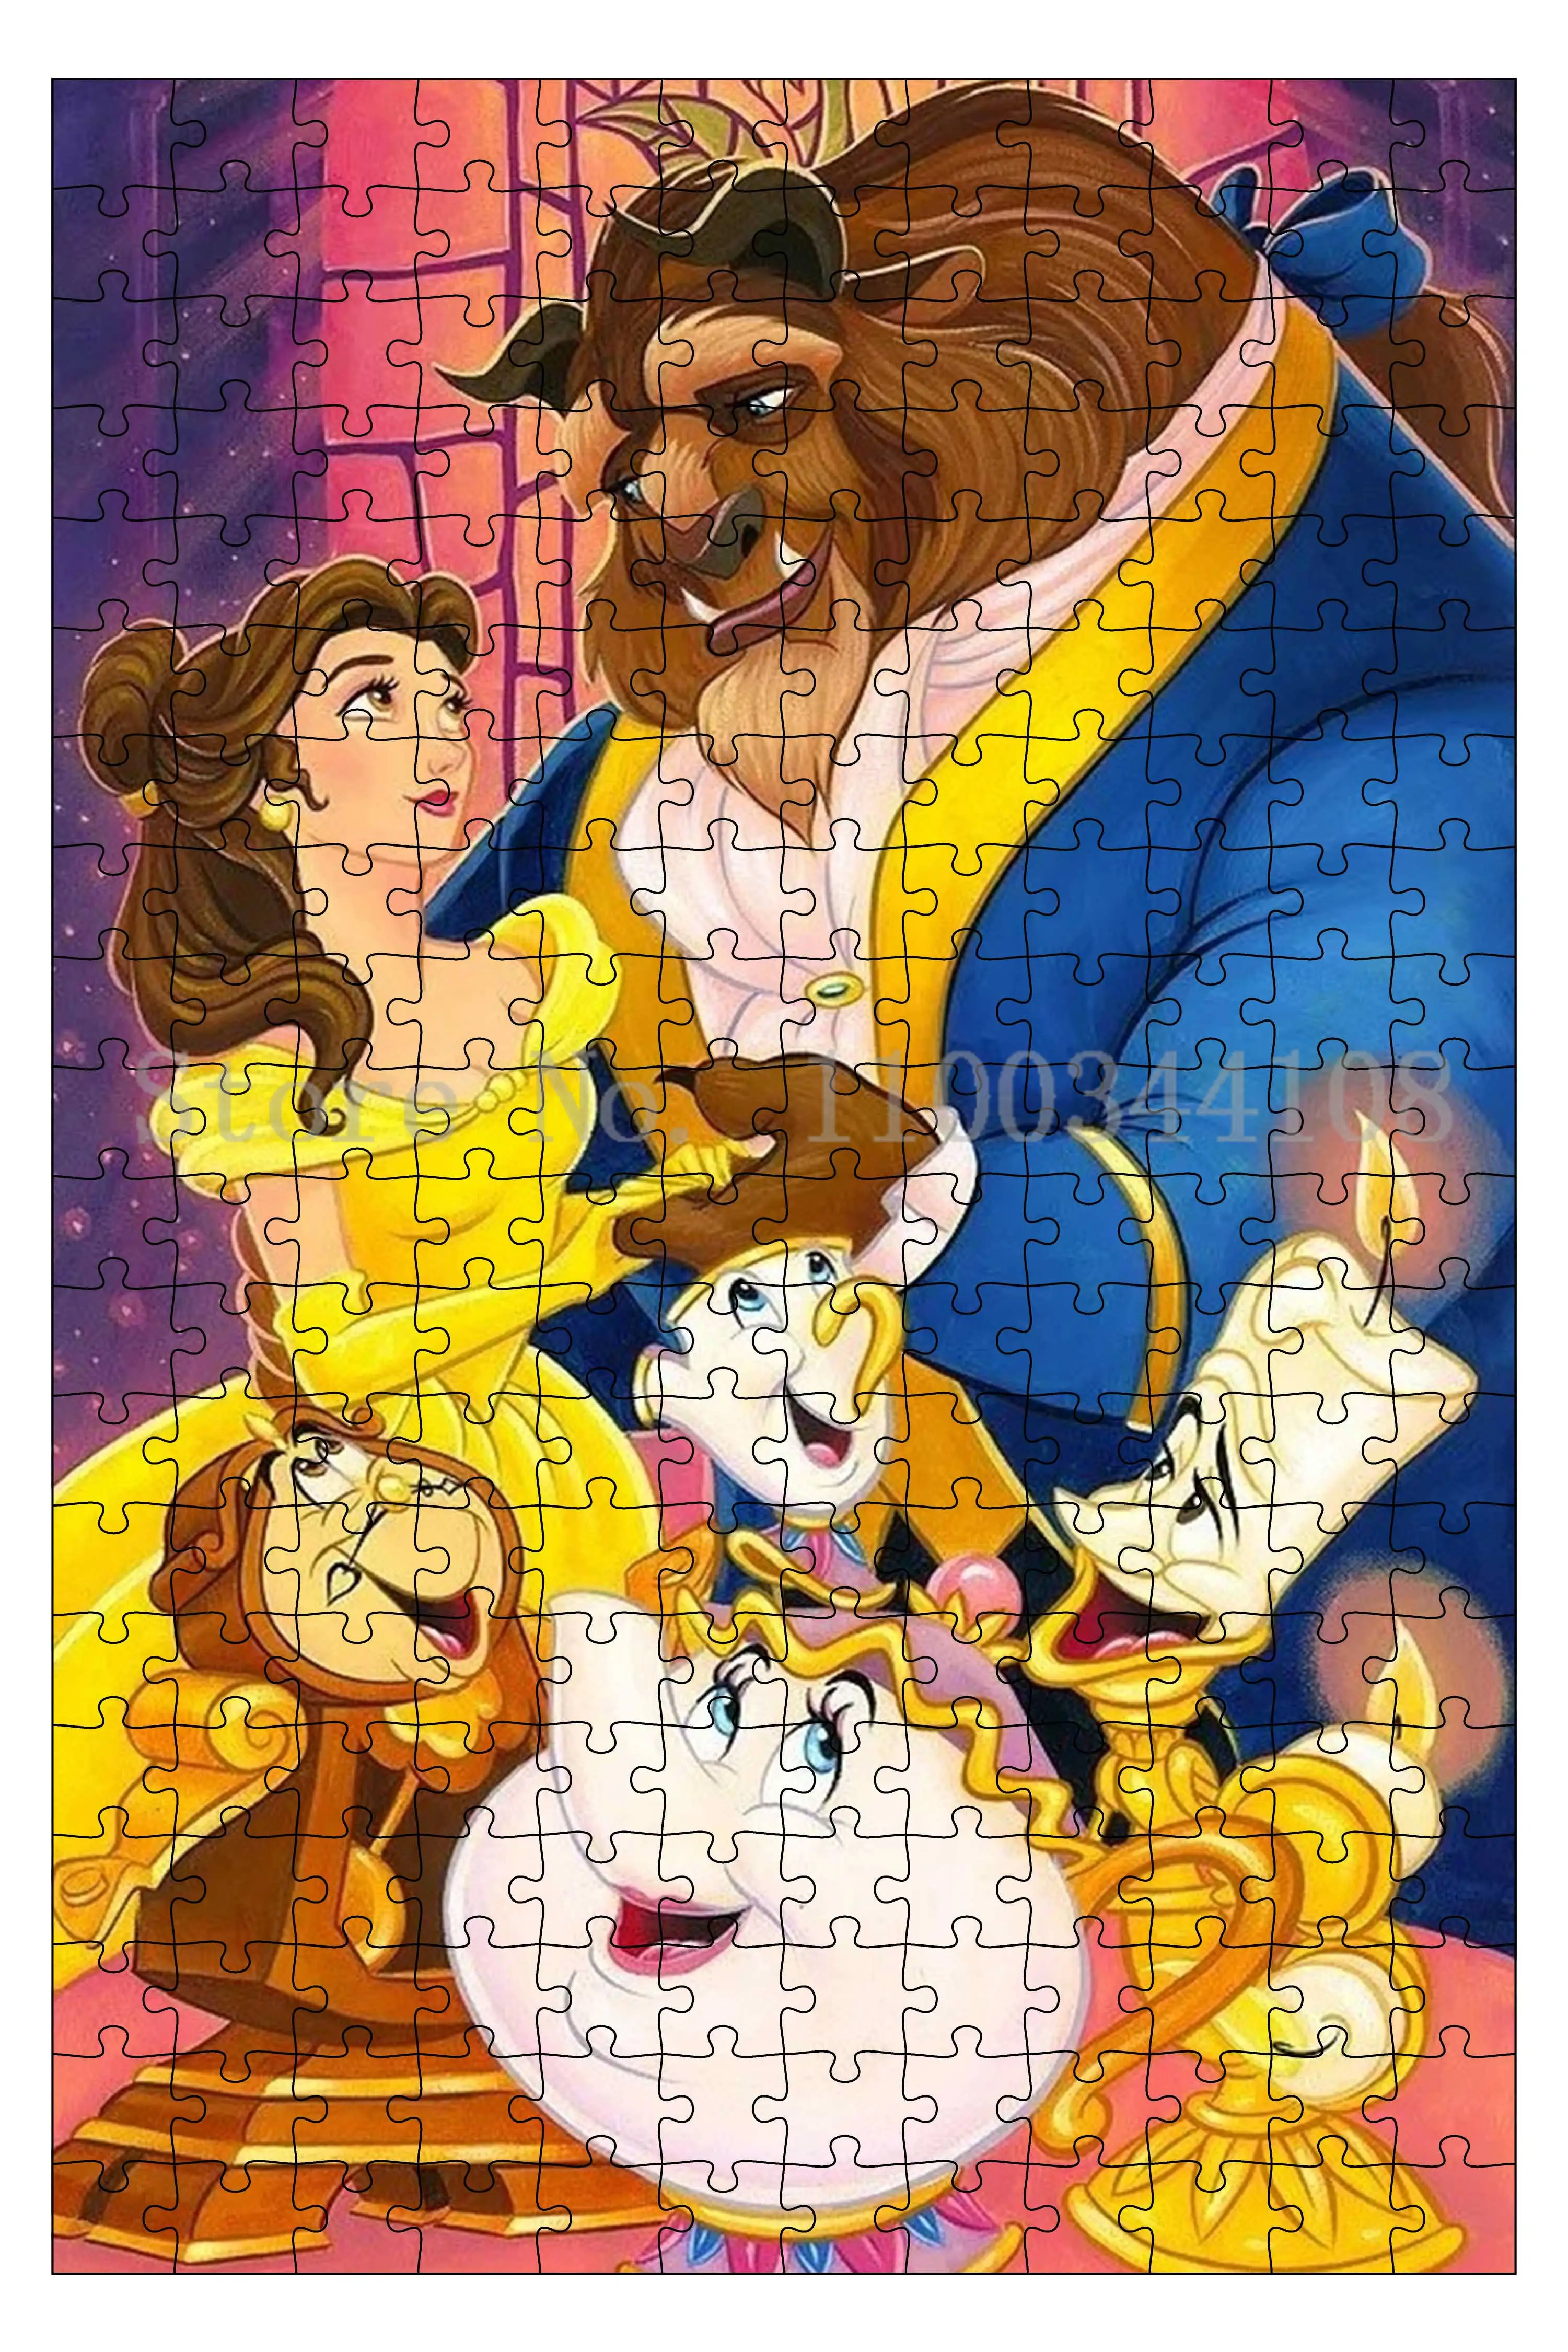 300/500/1000 Pieces Puzzle Beauty and The Beast Disney Cartoon Character  Jigsaw Puzzle for Adults Kids Educational Toys Fun Game - AliExpress